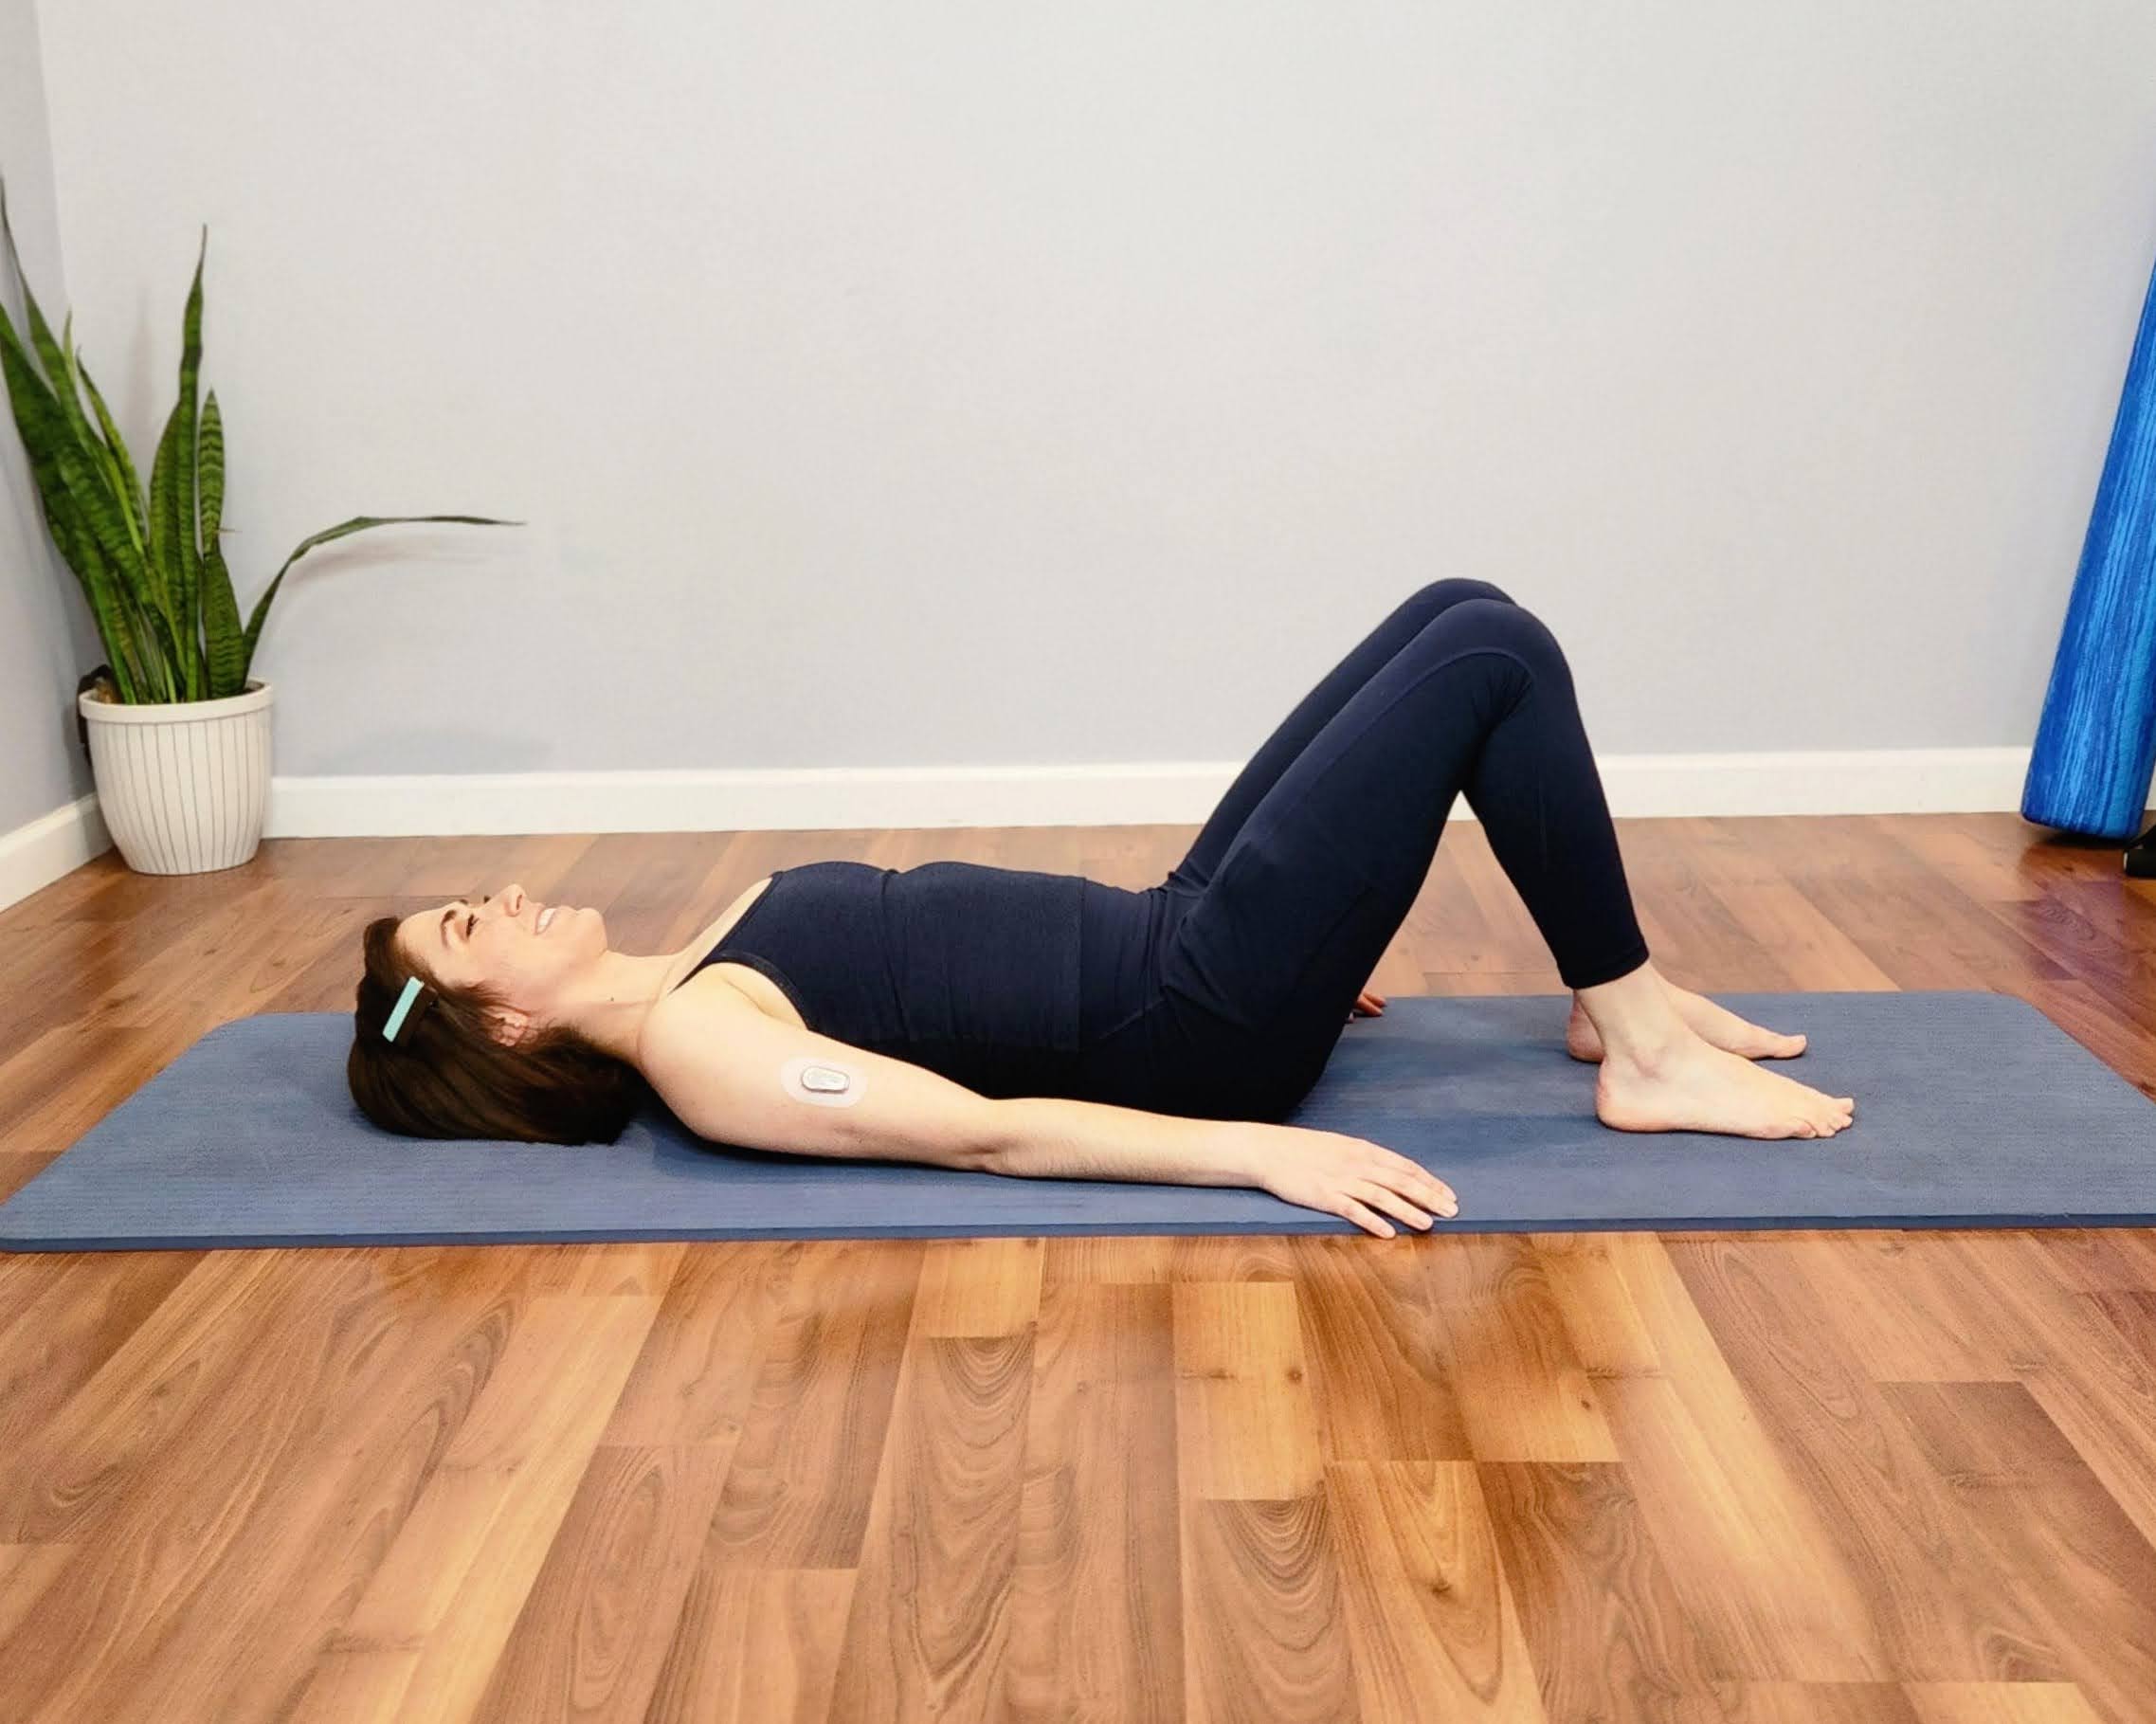 Get Fit with Pilates: 8 Full Body Exercises You Can Do At Home